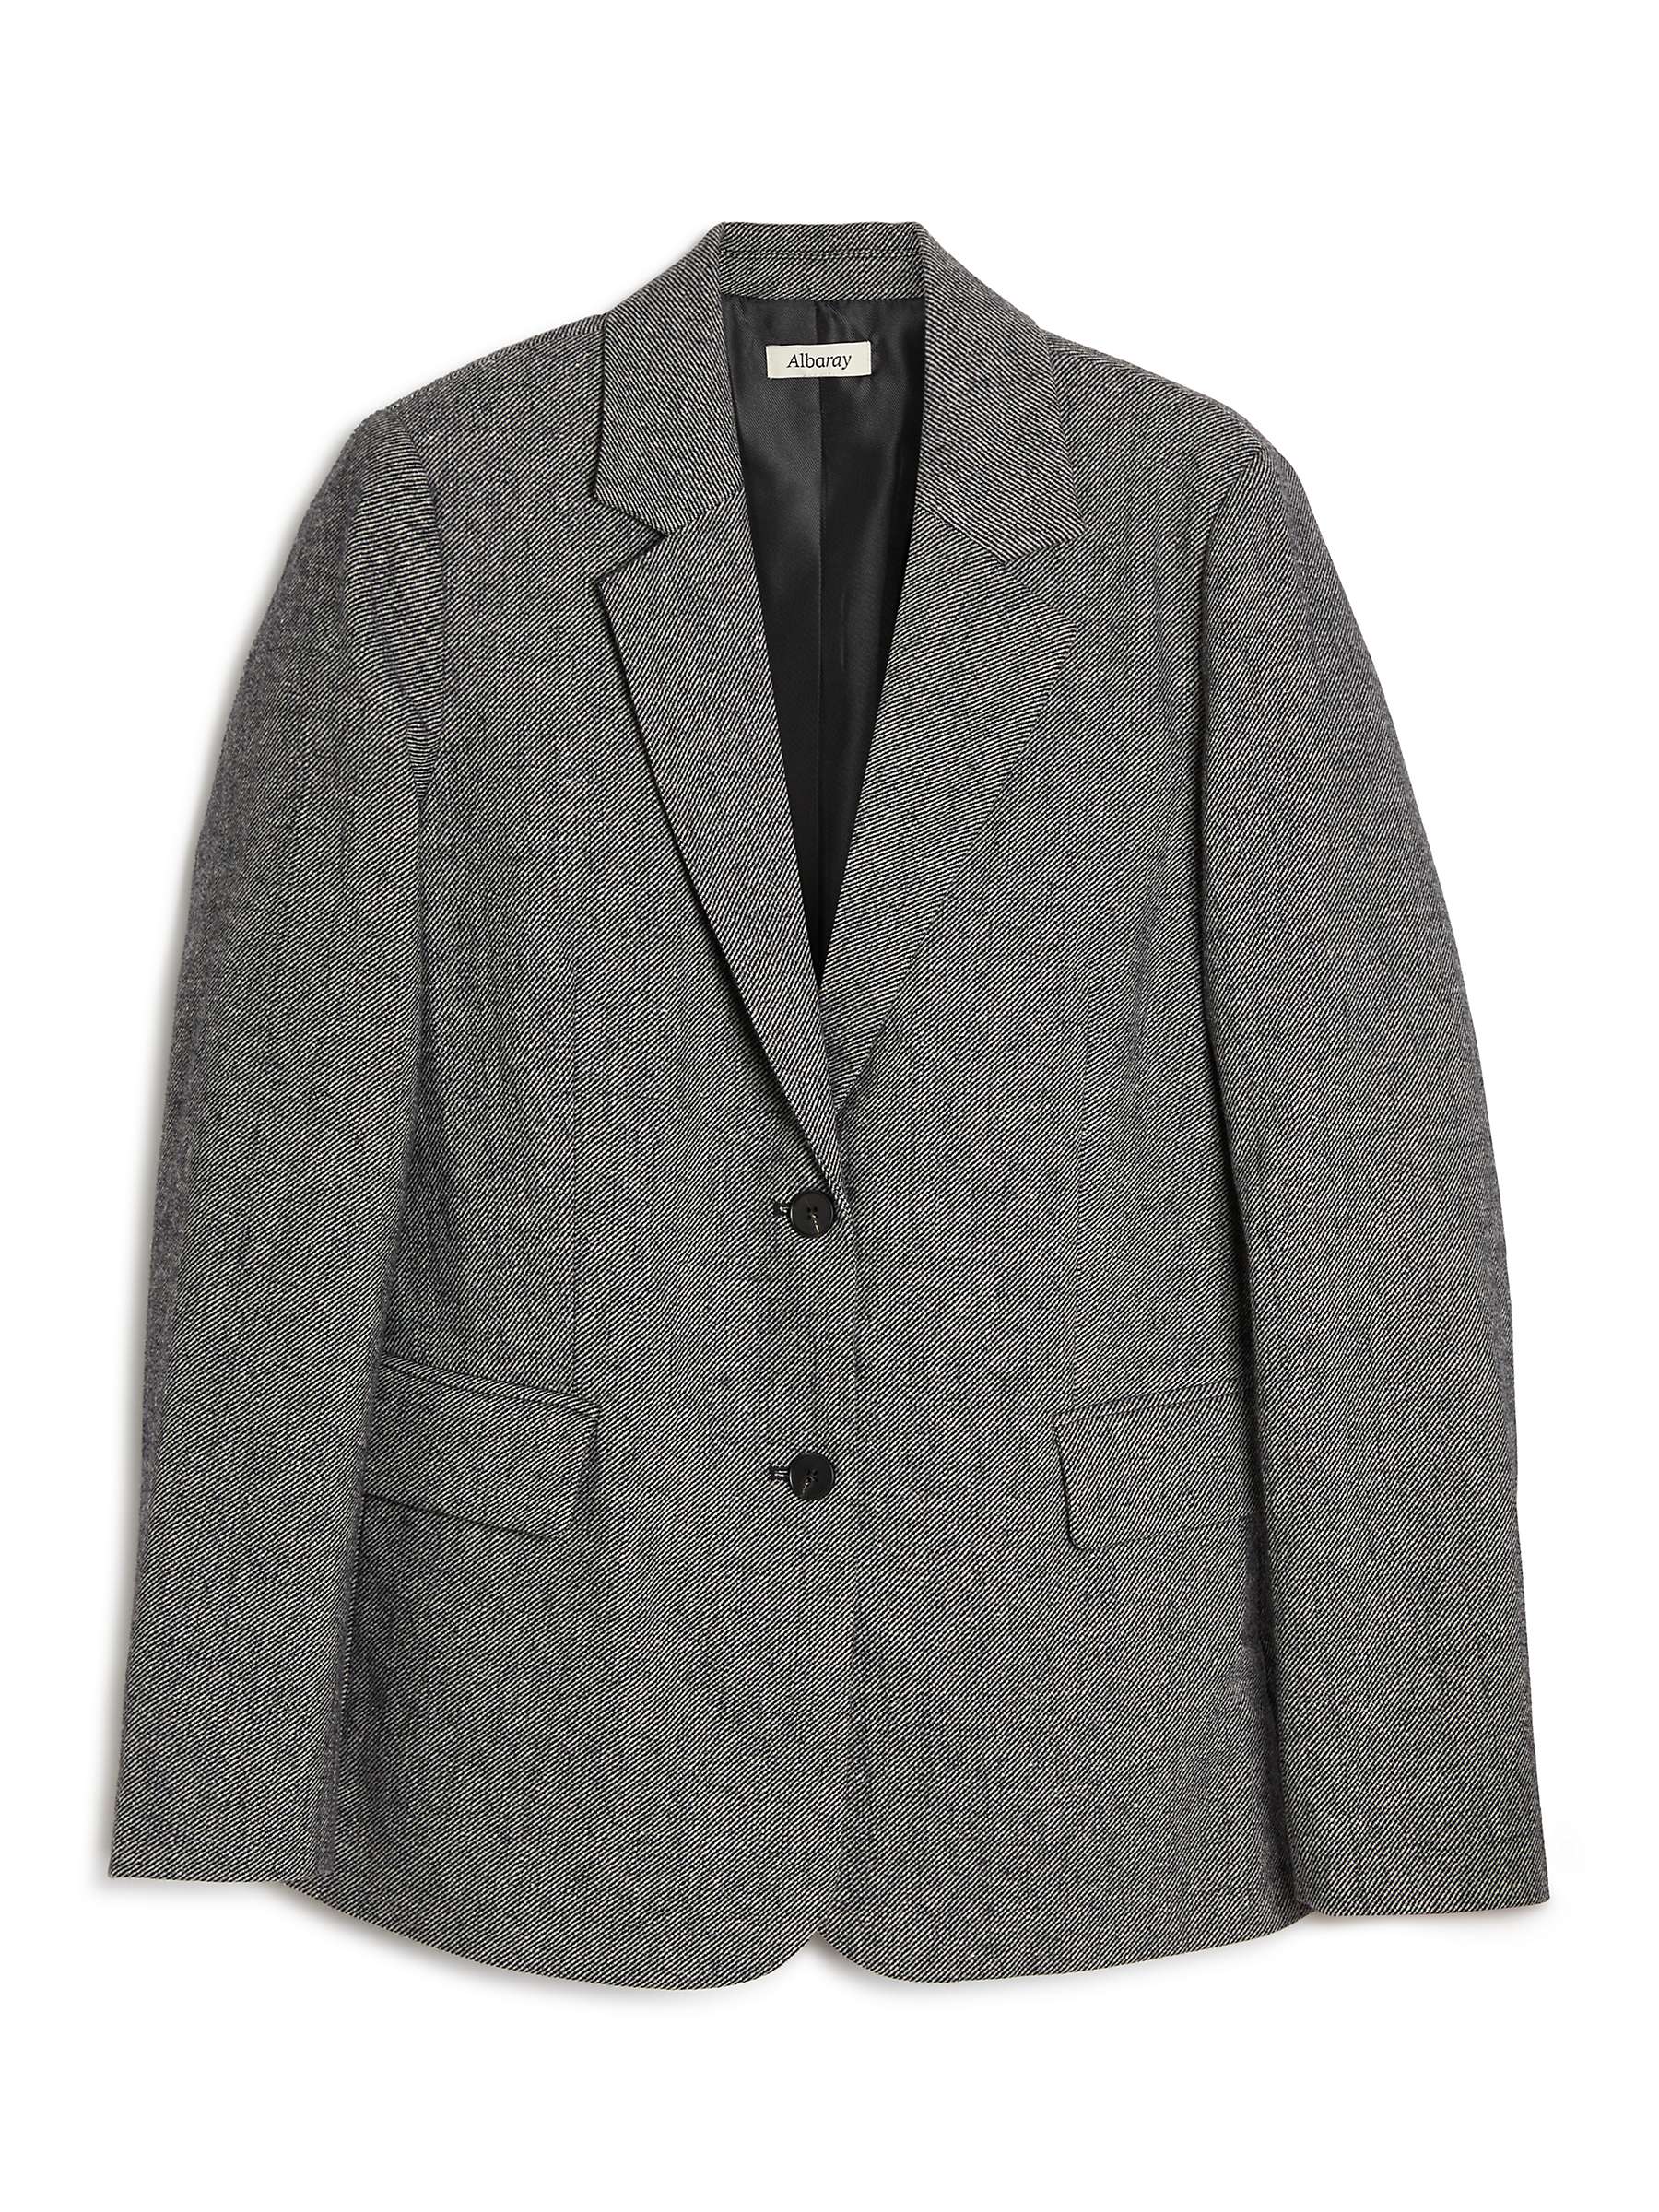 Buy Albaray Textured Wool Blend Relaxed Tailored Blazer, Grey Online at johnlewis.com